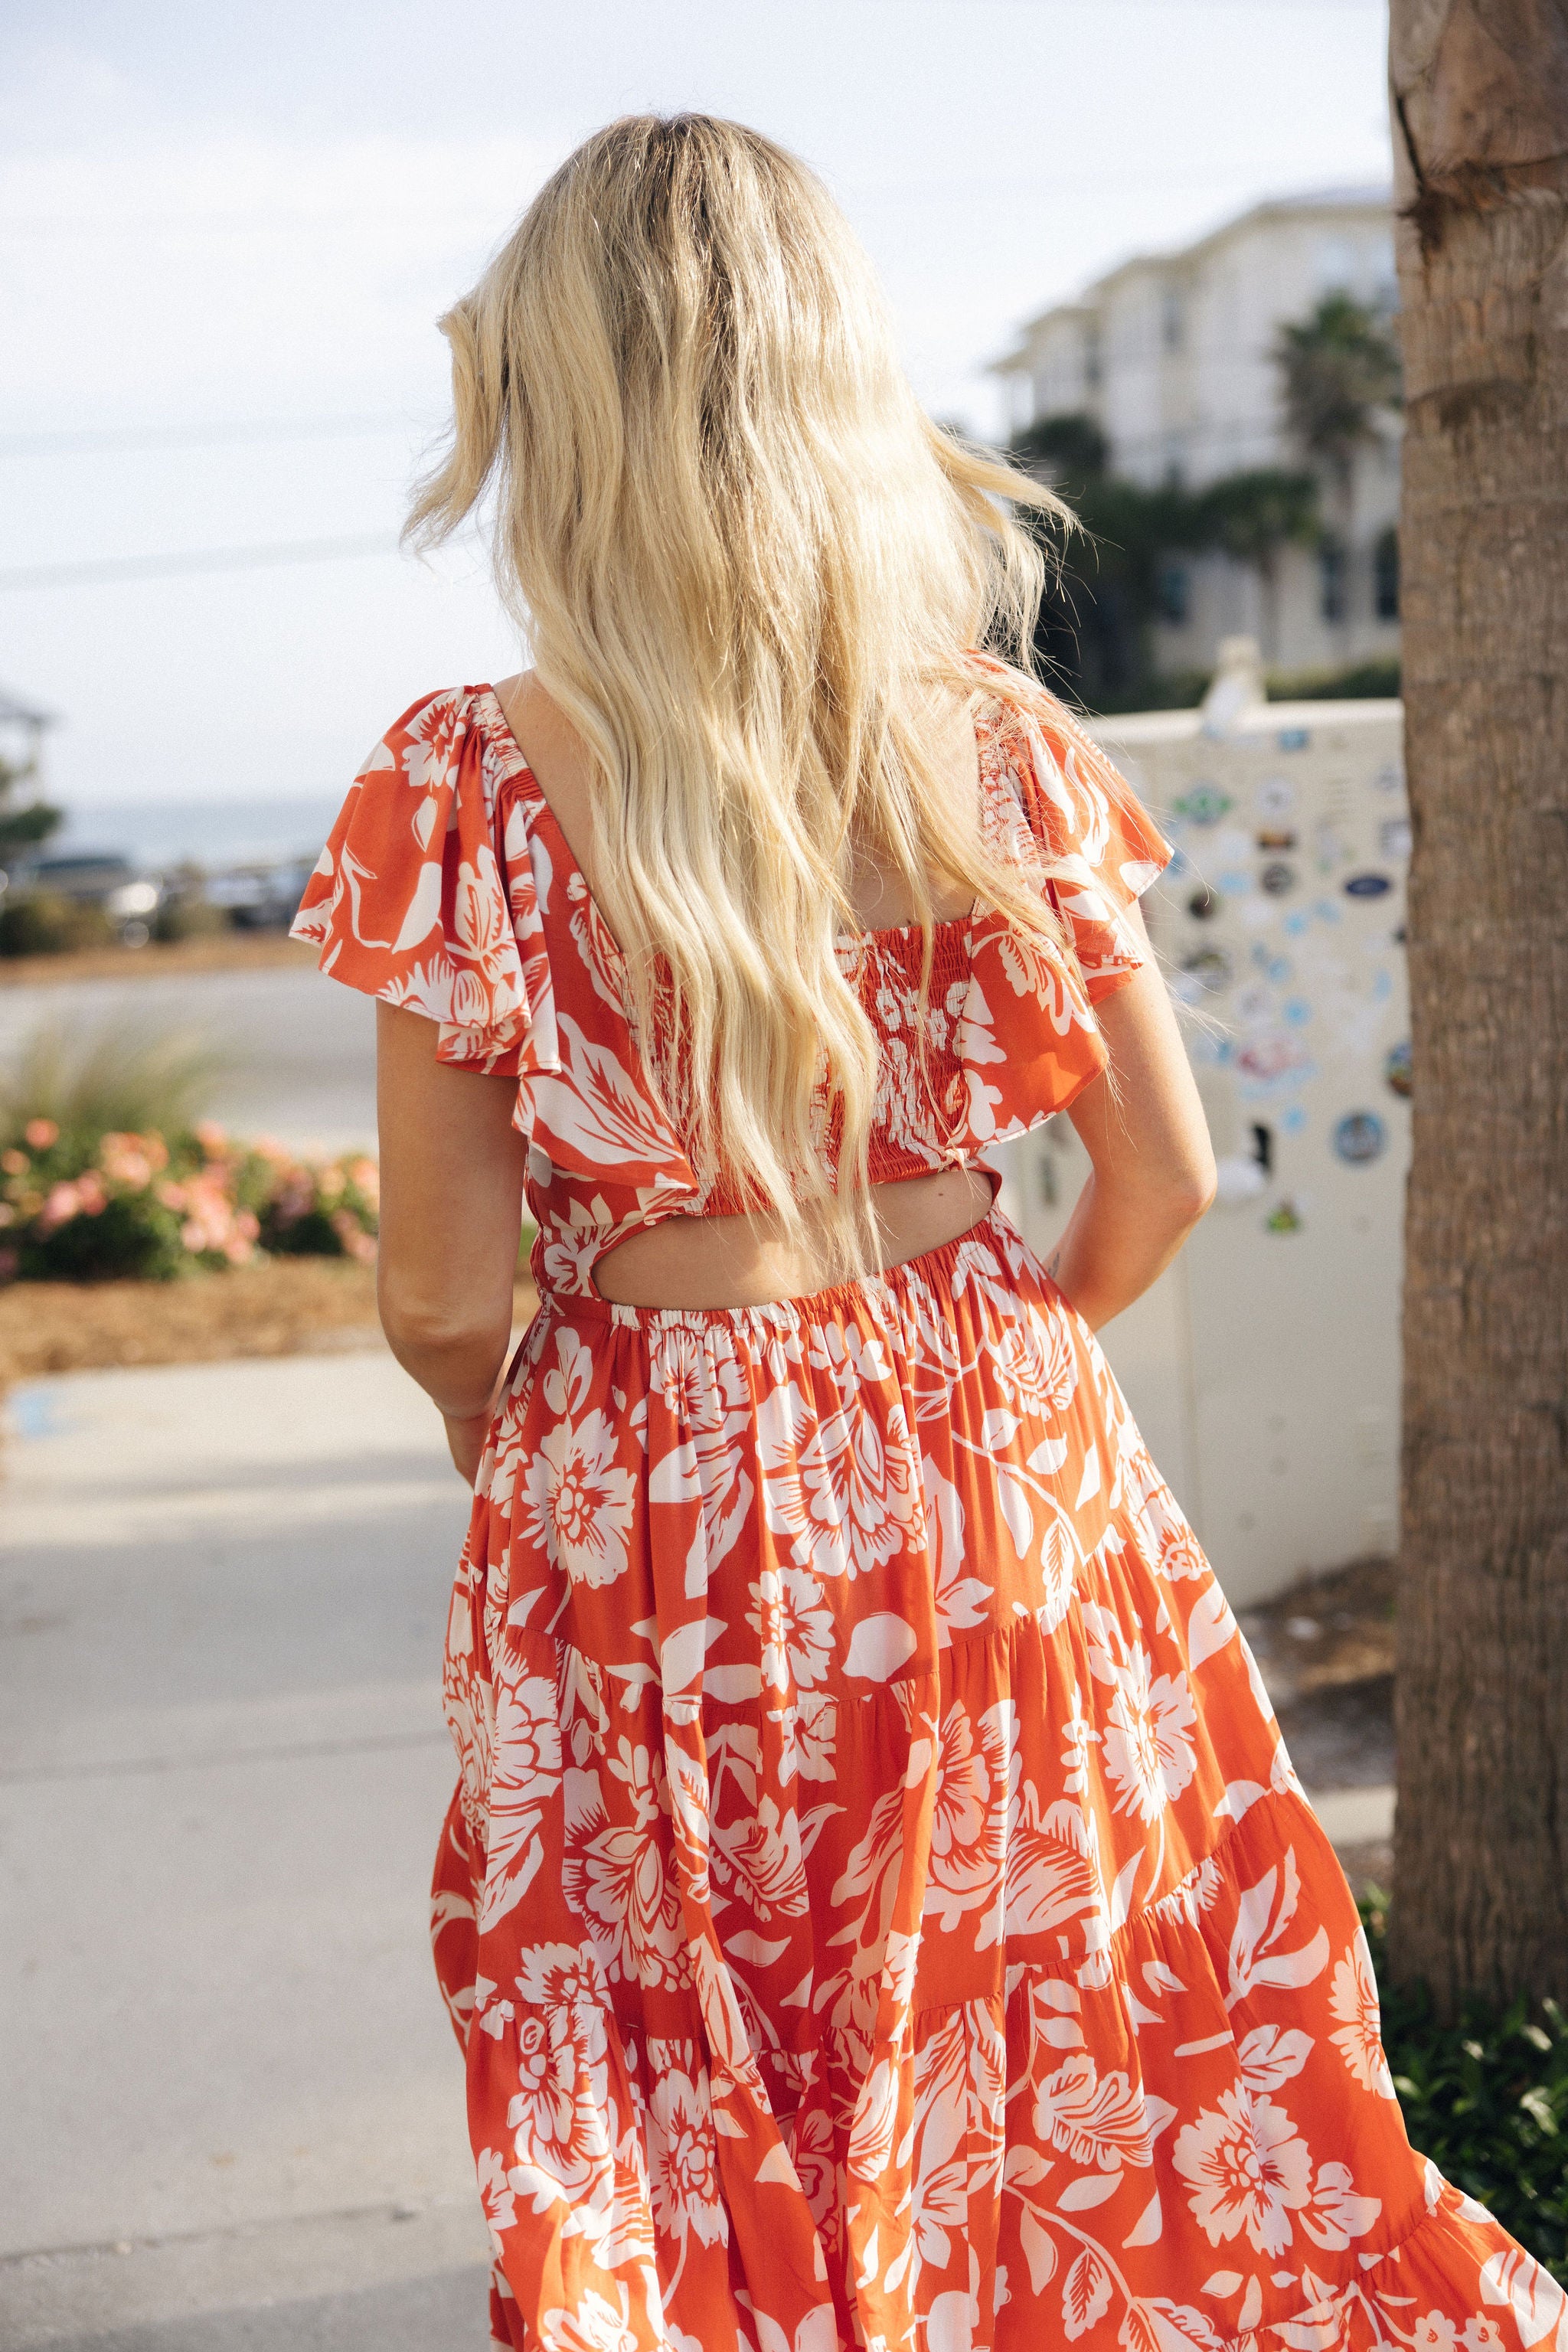 Back view of female model wearing the Elena Orange & Cream Floral Midi Dress which features Orange and White Floral Design, Midi Length, Orange Thigh Length Lining, Tiered Body, Smocked Waistband, Sweetheart Neckline, Ruffle Straps and Open Back